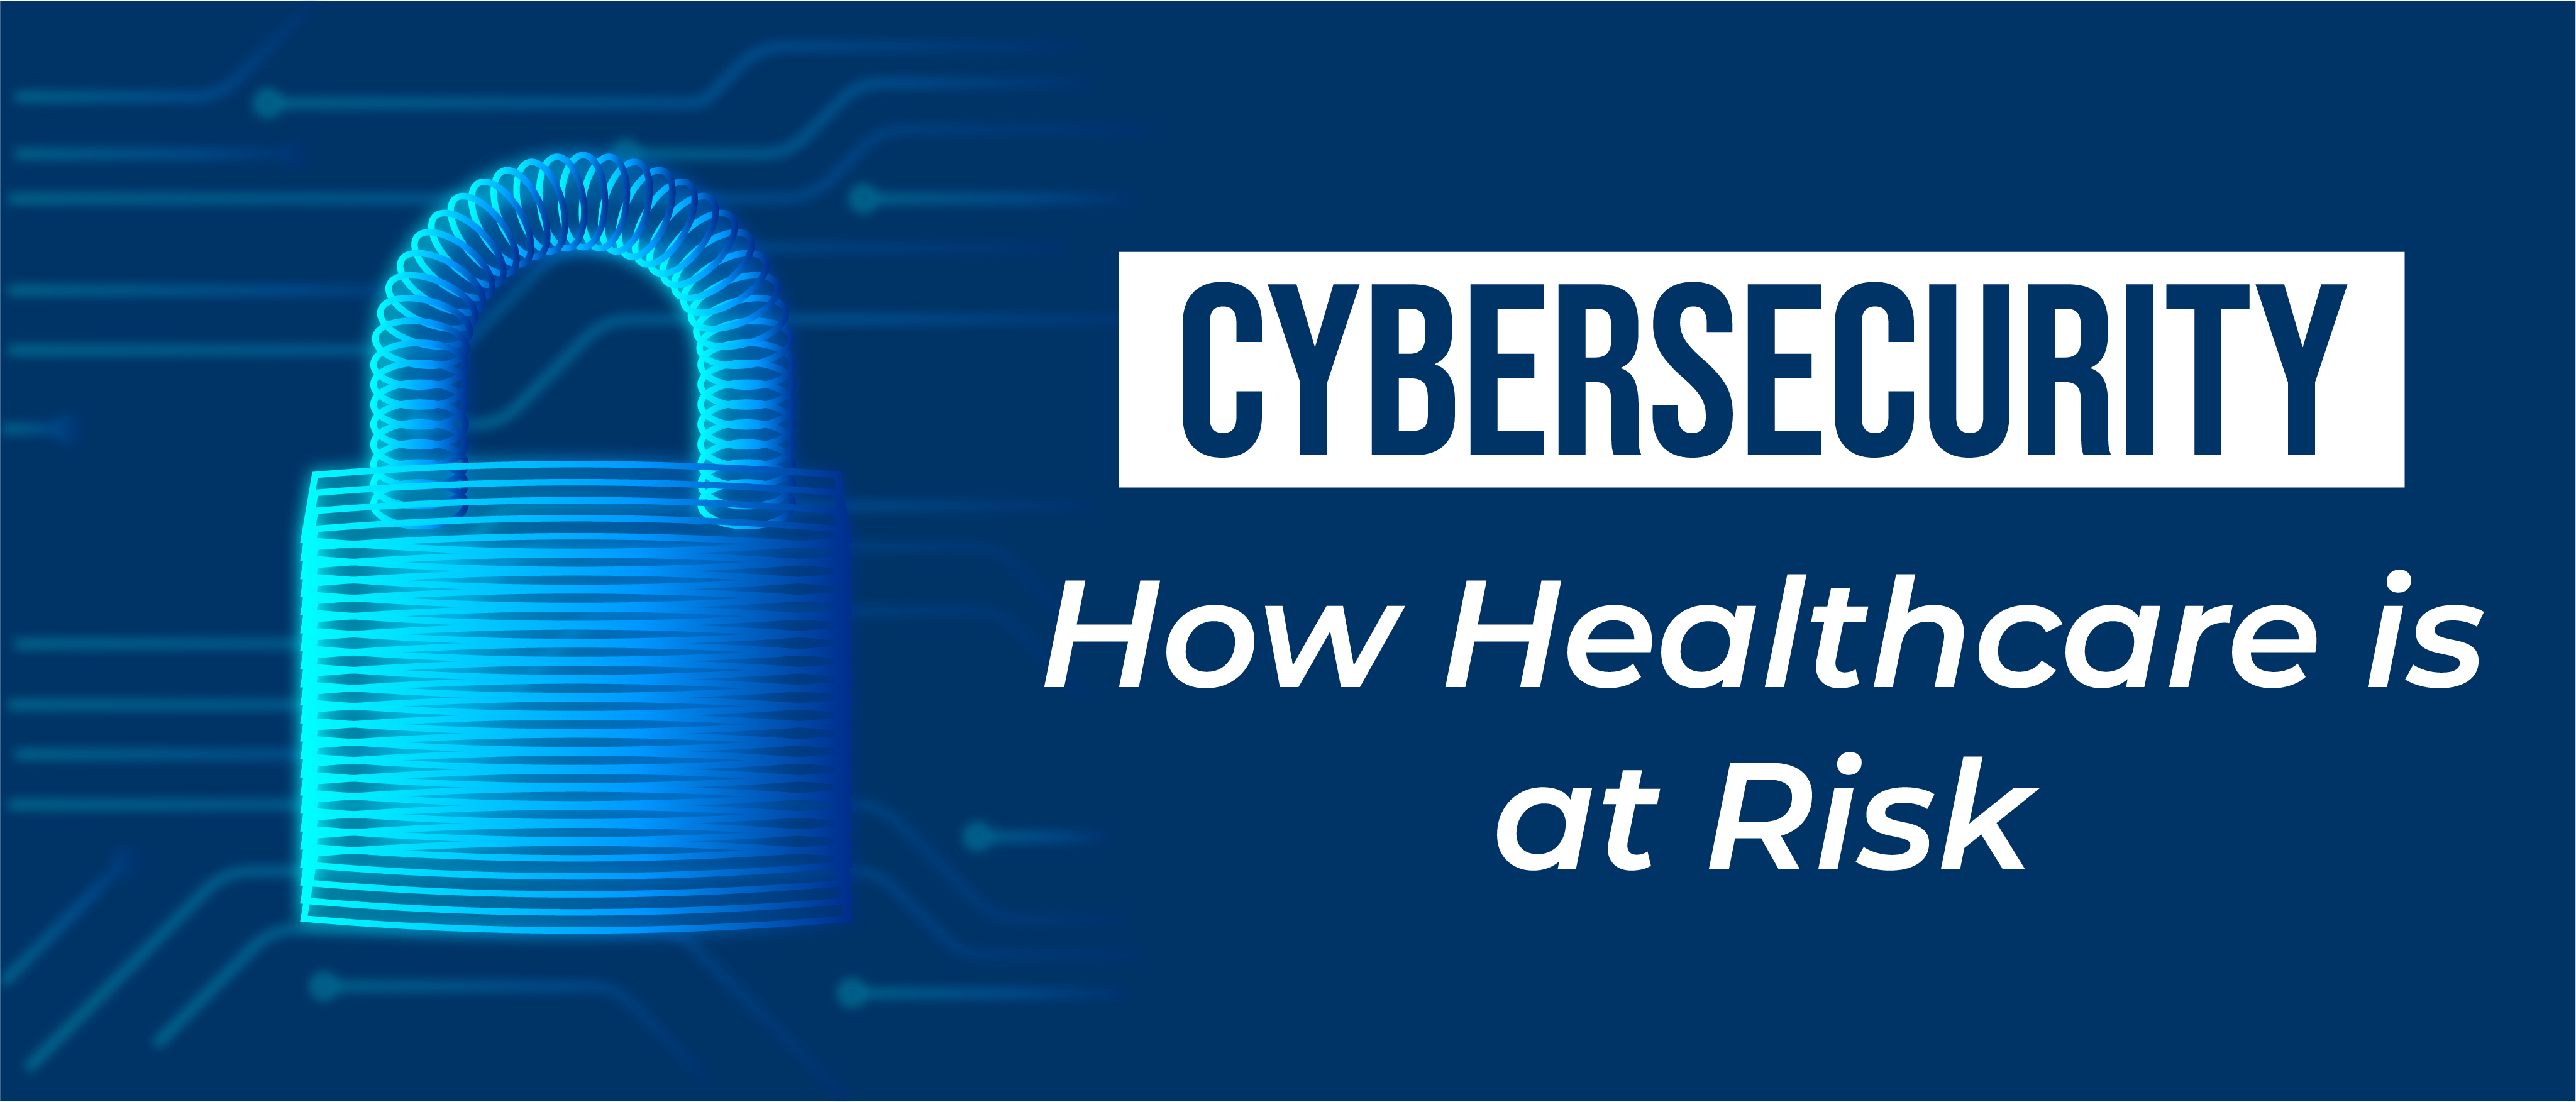 Cybersecurity Safeguarding Healthcare in the Digital age